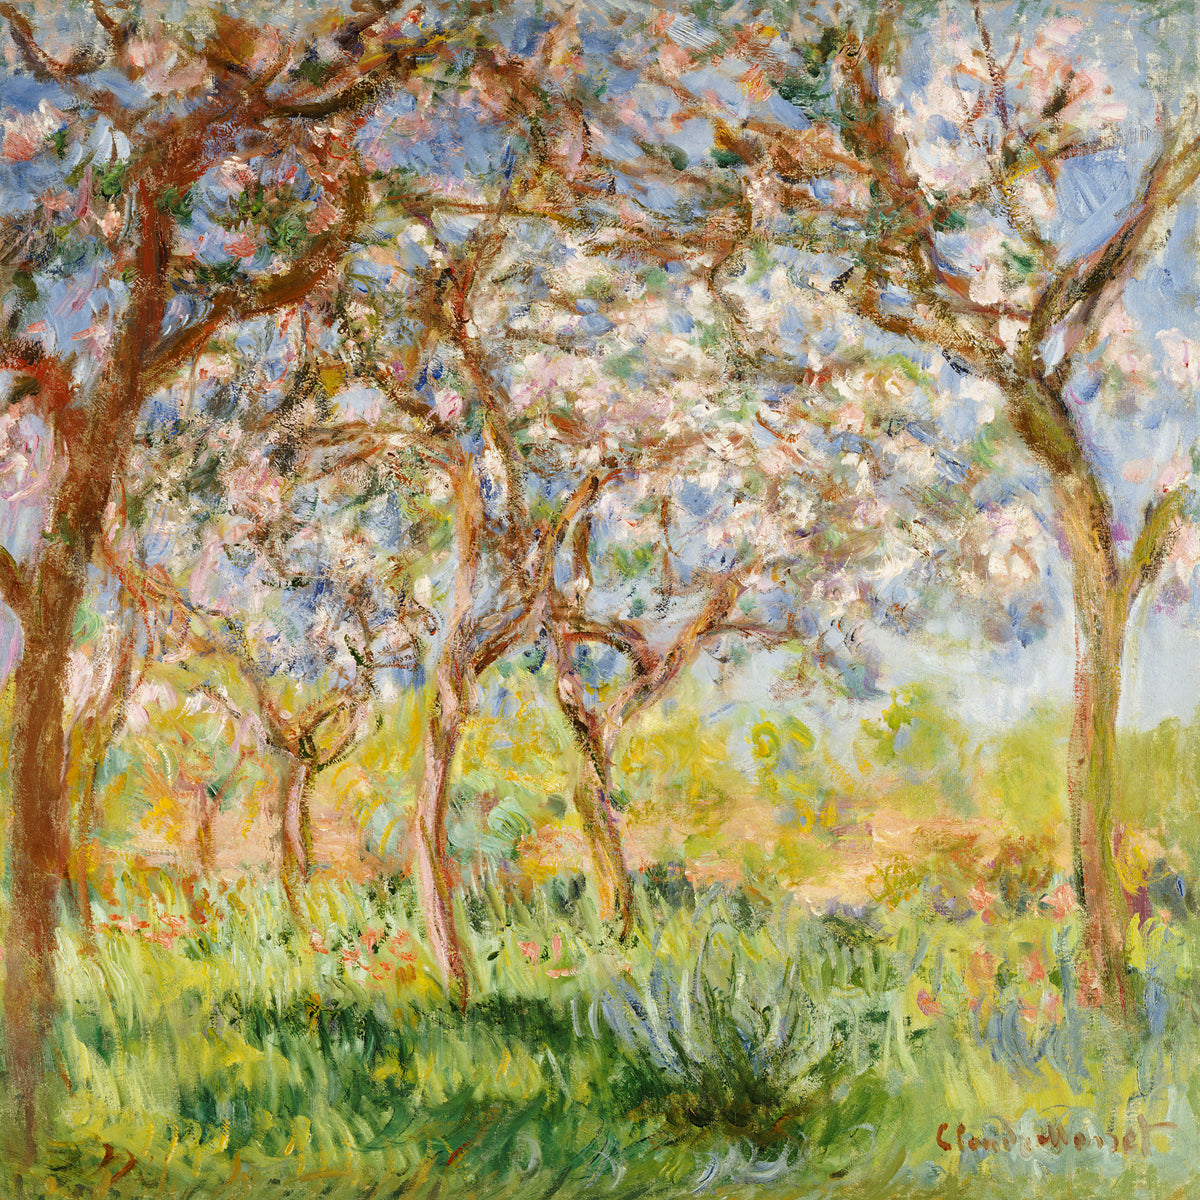 Claude Monet - Frühling in Giverny